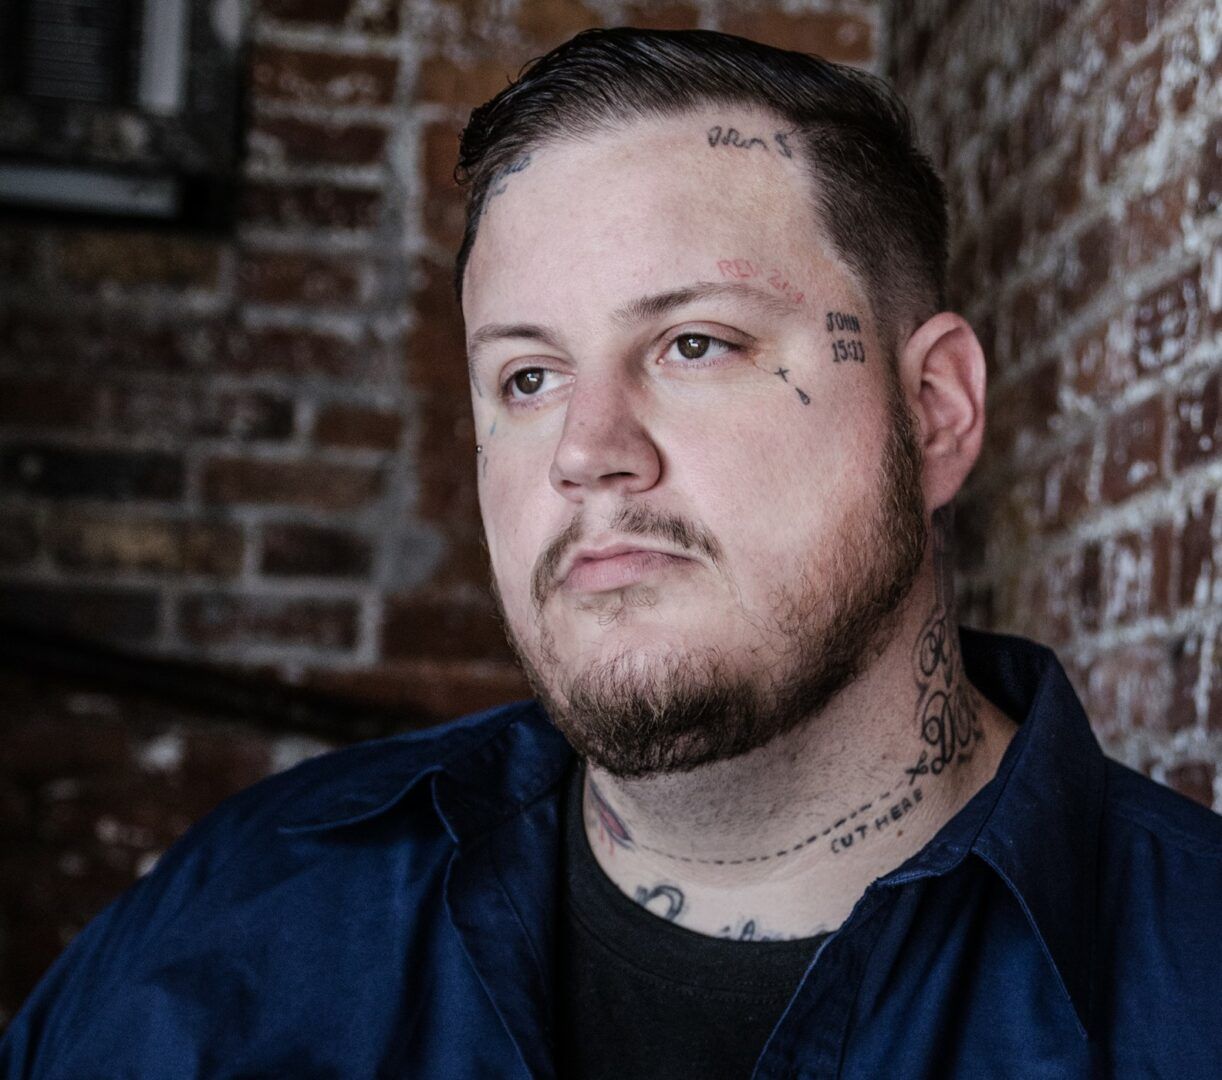 Jelly Roll Announces the “Sobriety Sucks Promo Tour”